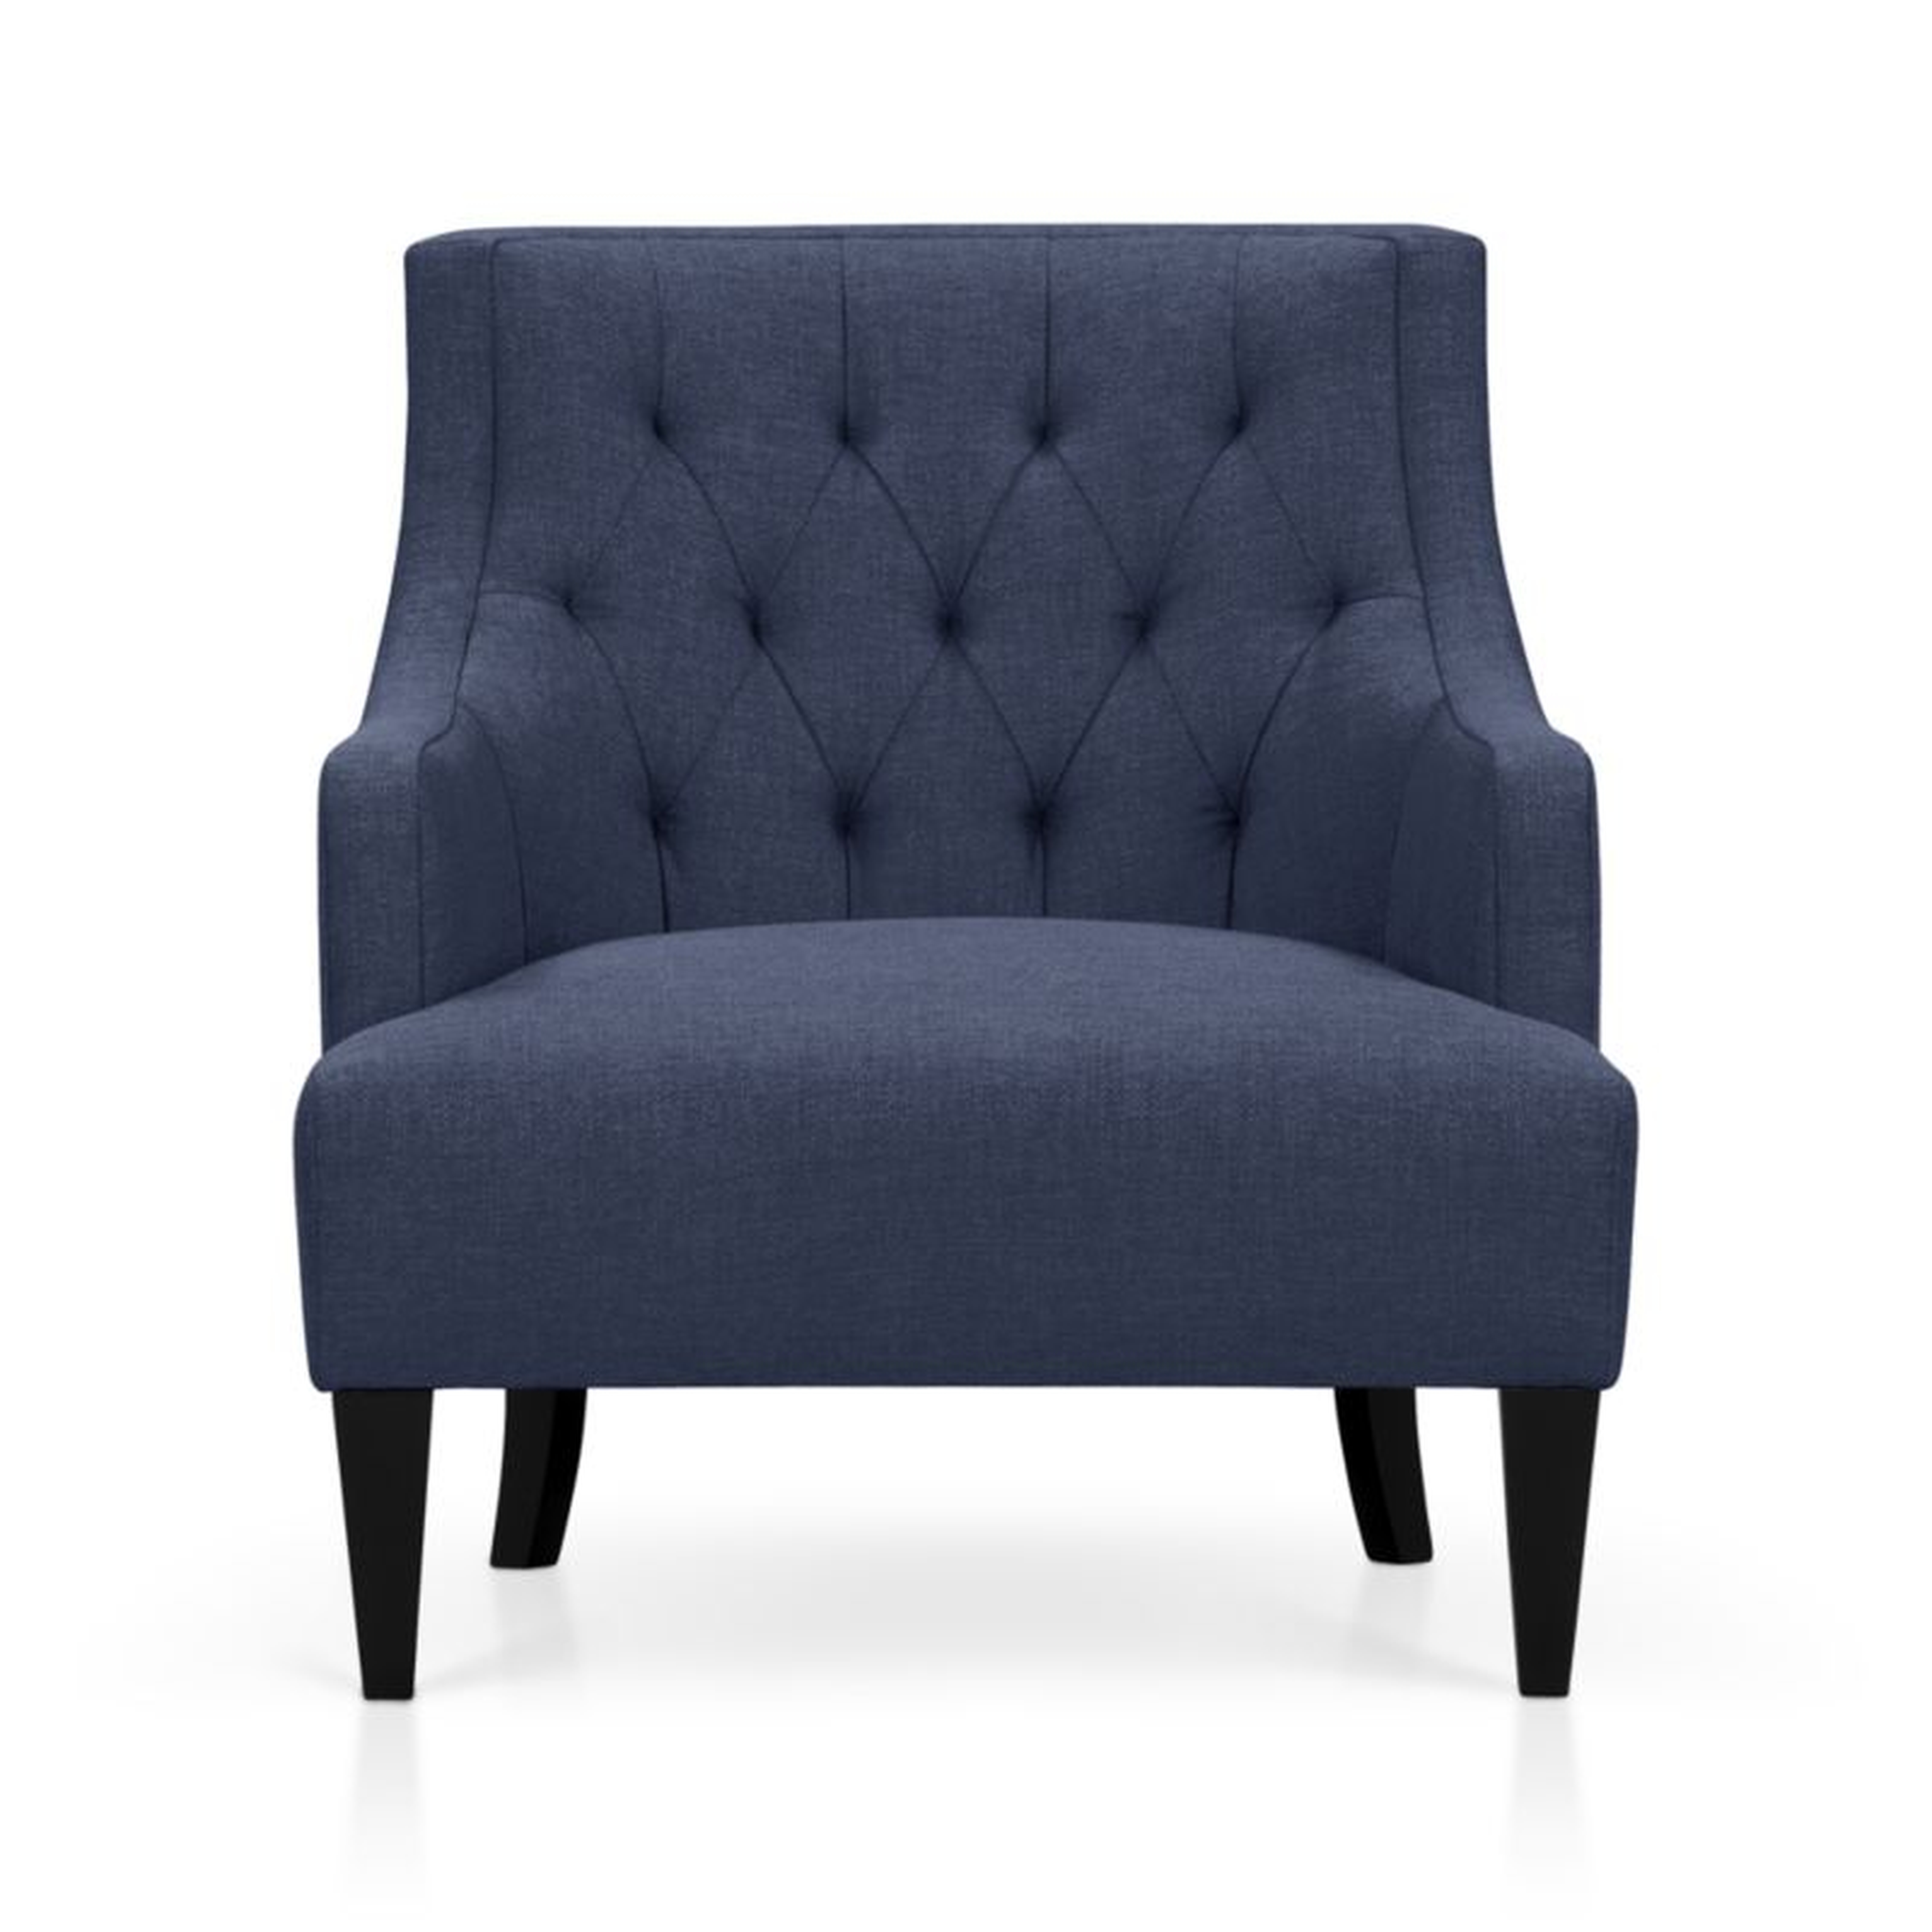 Tess Chair - Crate and Barrel